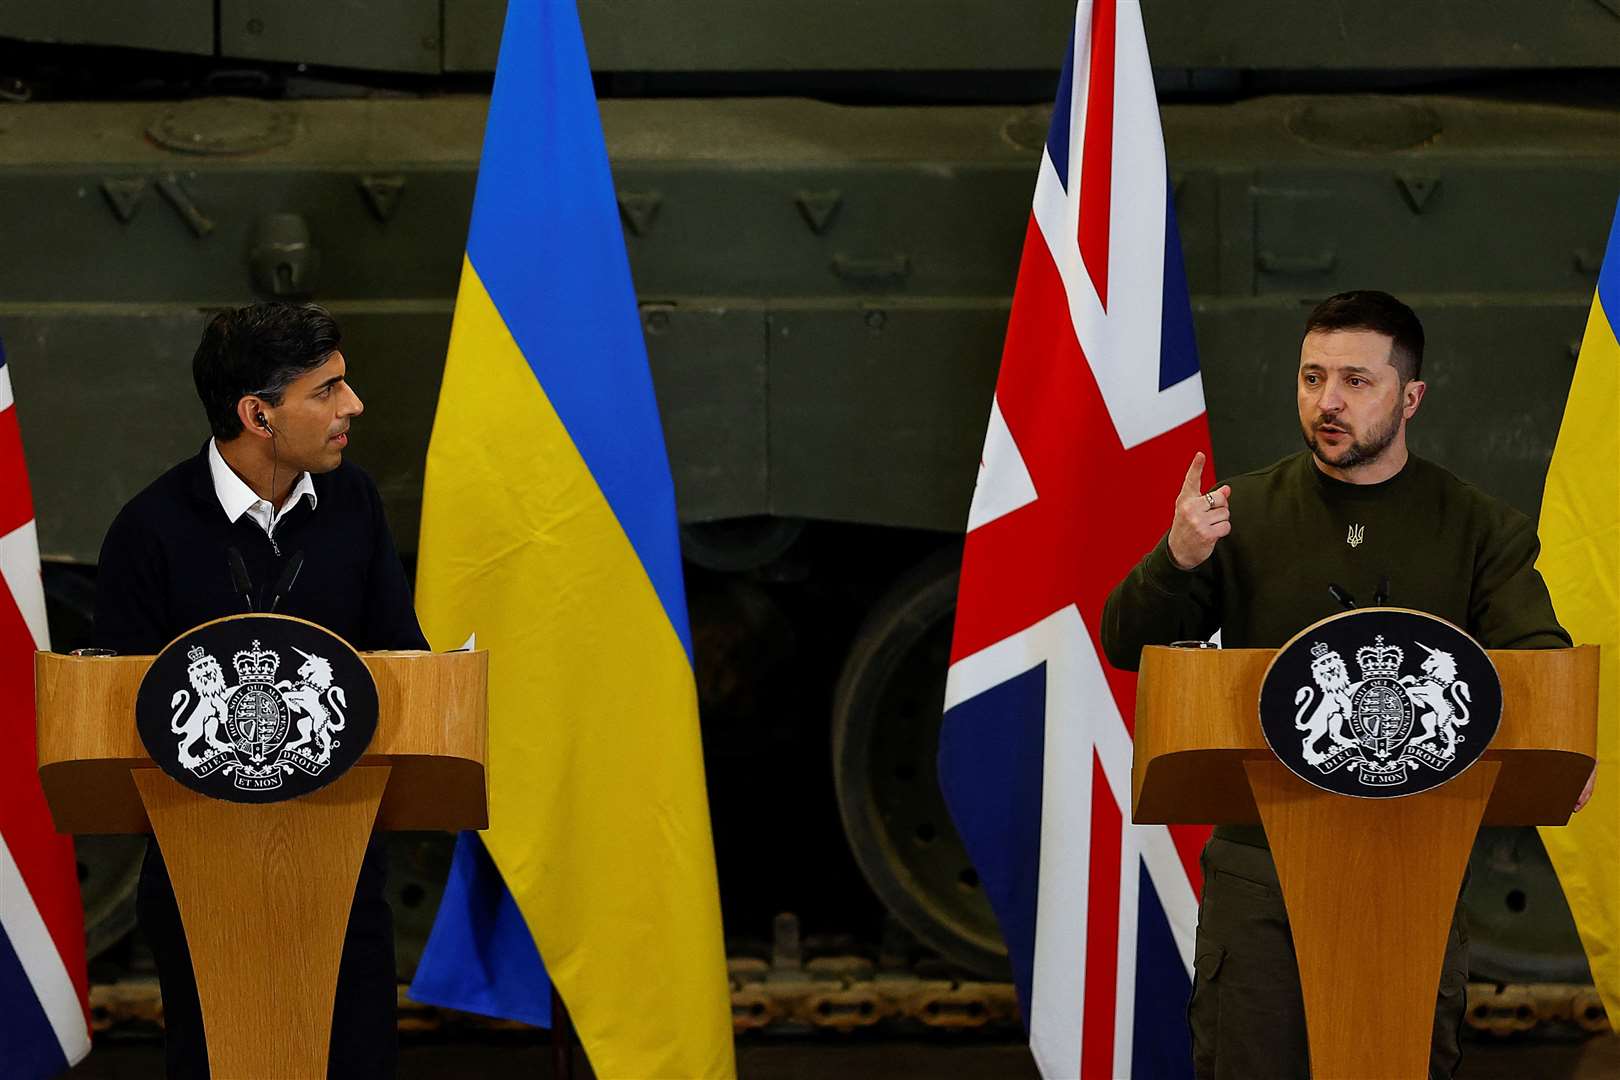 Prime Minister Rishi Sunak (left) and Ukrainian President Volodymyr Zelensky discussed allied discussions on Typhoons at a press conference in Dorset (Peter Nicholls/PA)